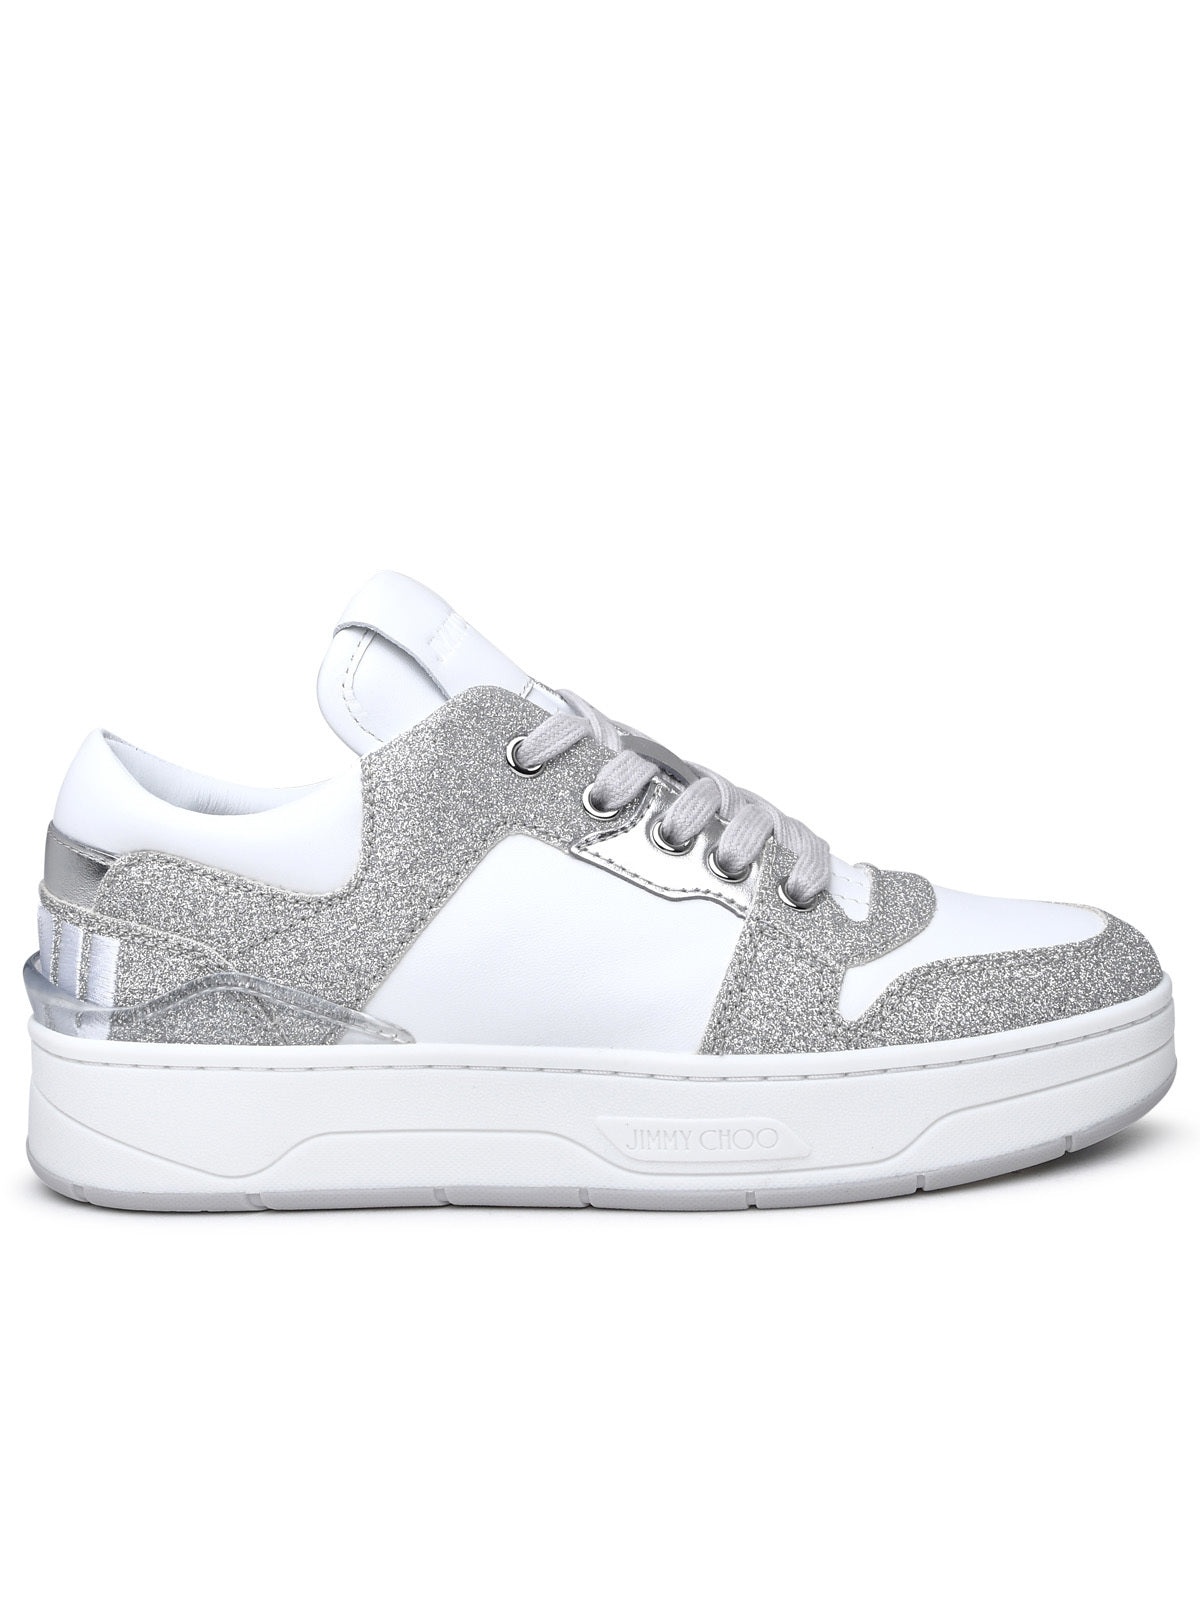 Jimmy Choo Woman Cashmere White Leather Sneakers - 1